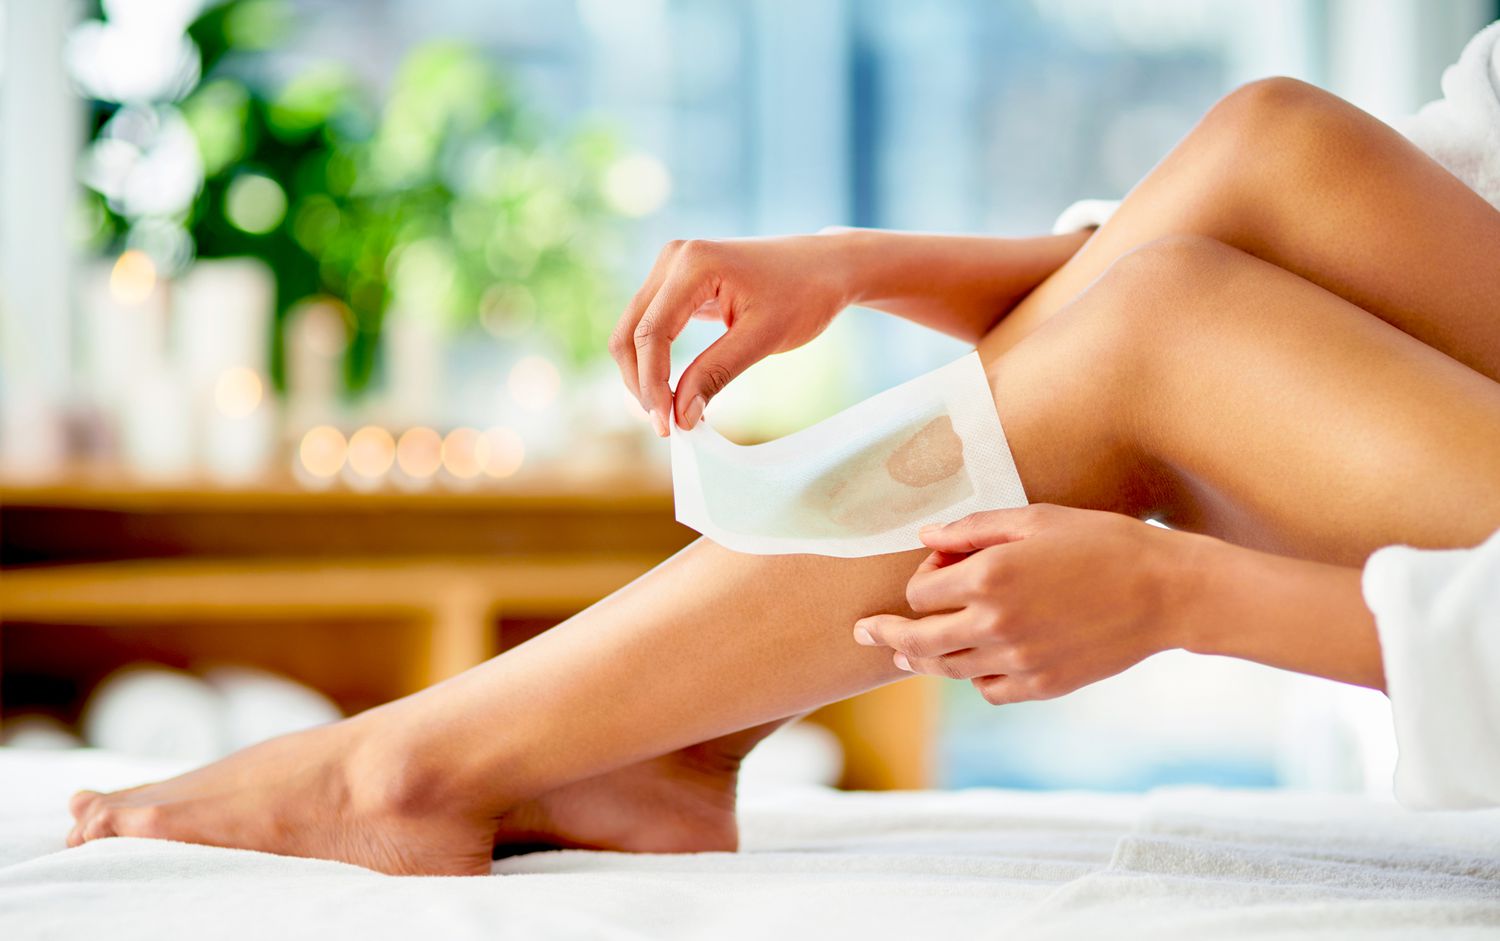 woman waxing her legs at home